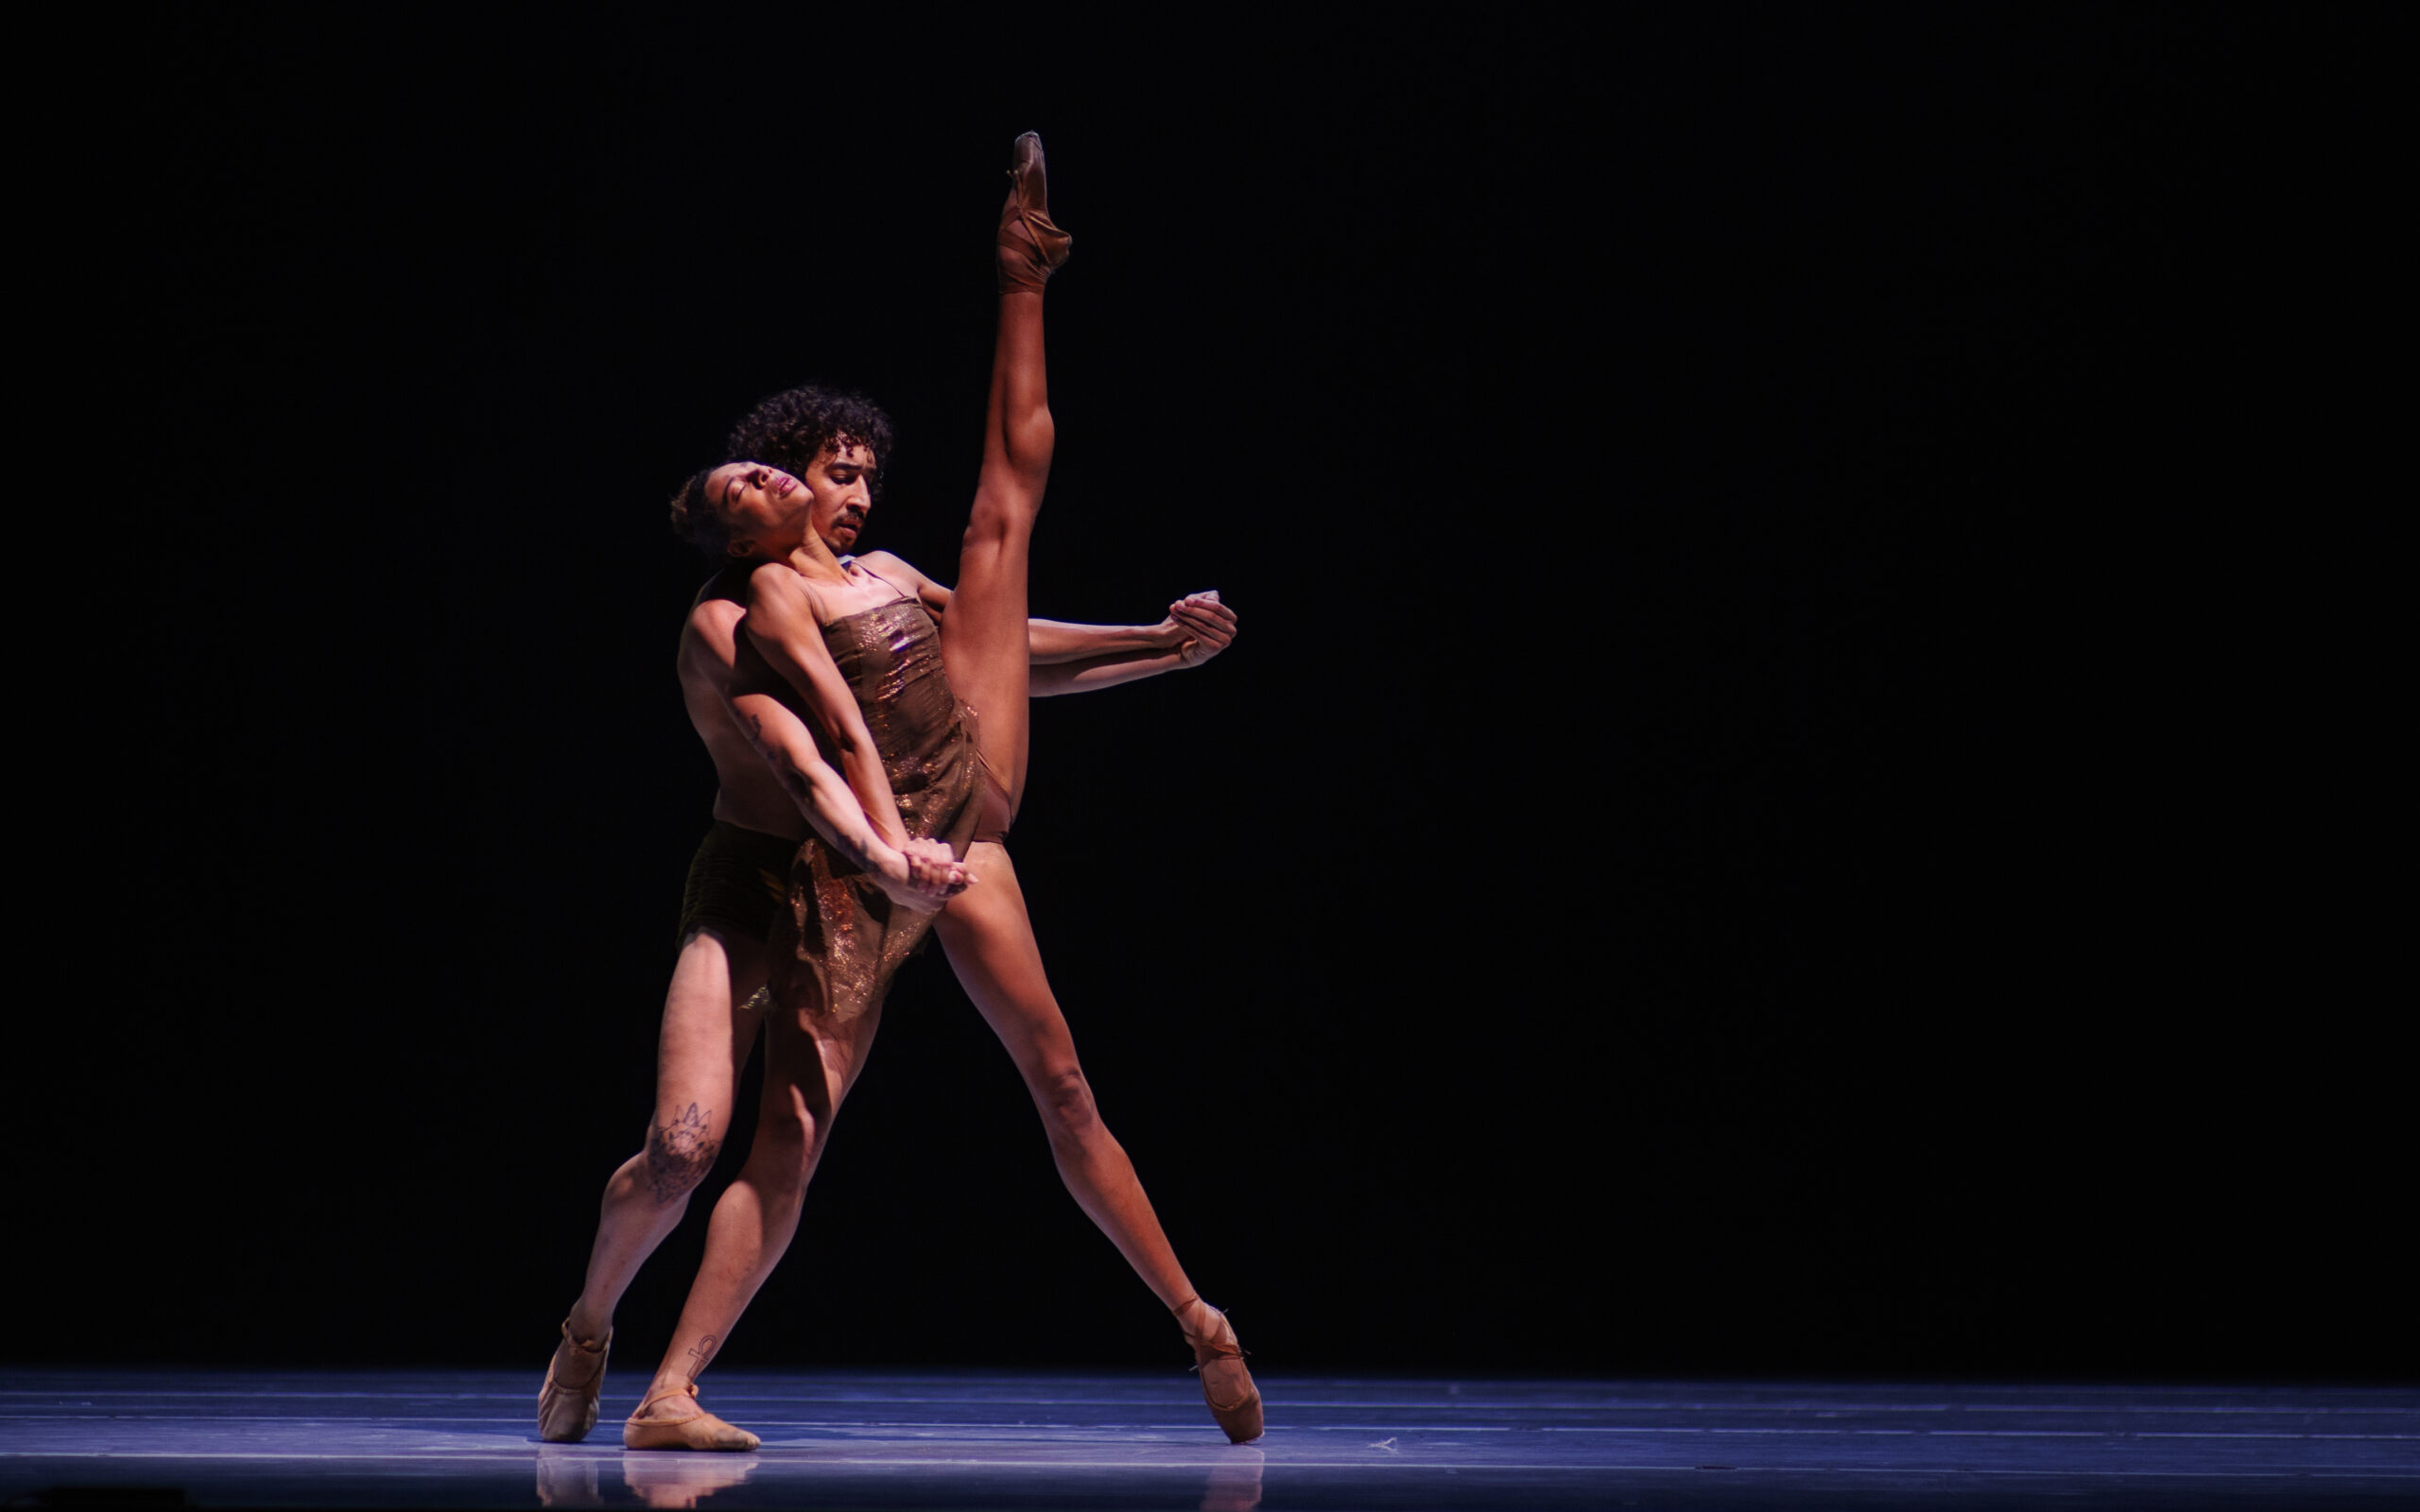 Alonzo King LINES Ballet artists Adji Cissoko (en pointe) and Shuaib Elhassan performing Alonzo King's "Deep River" on stage